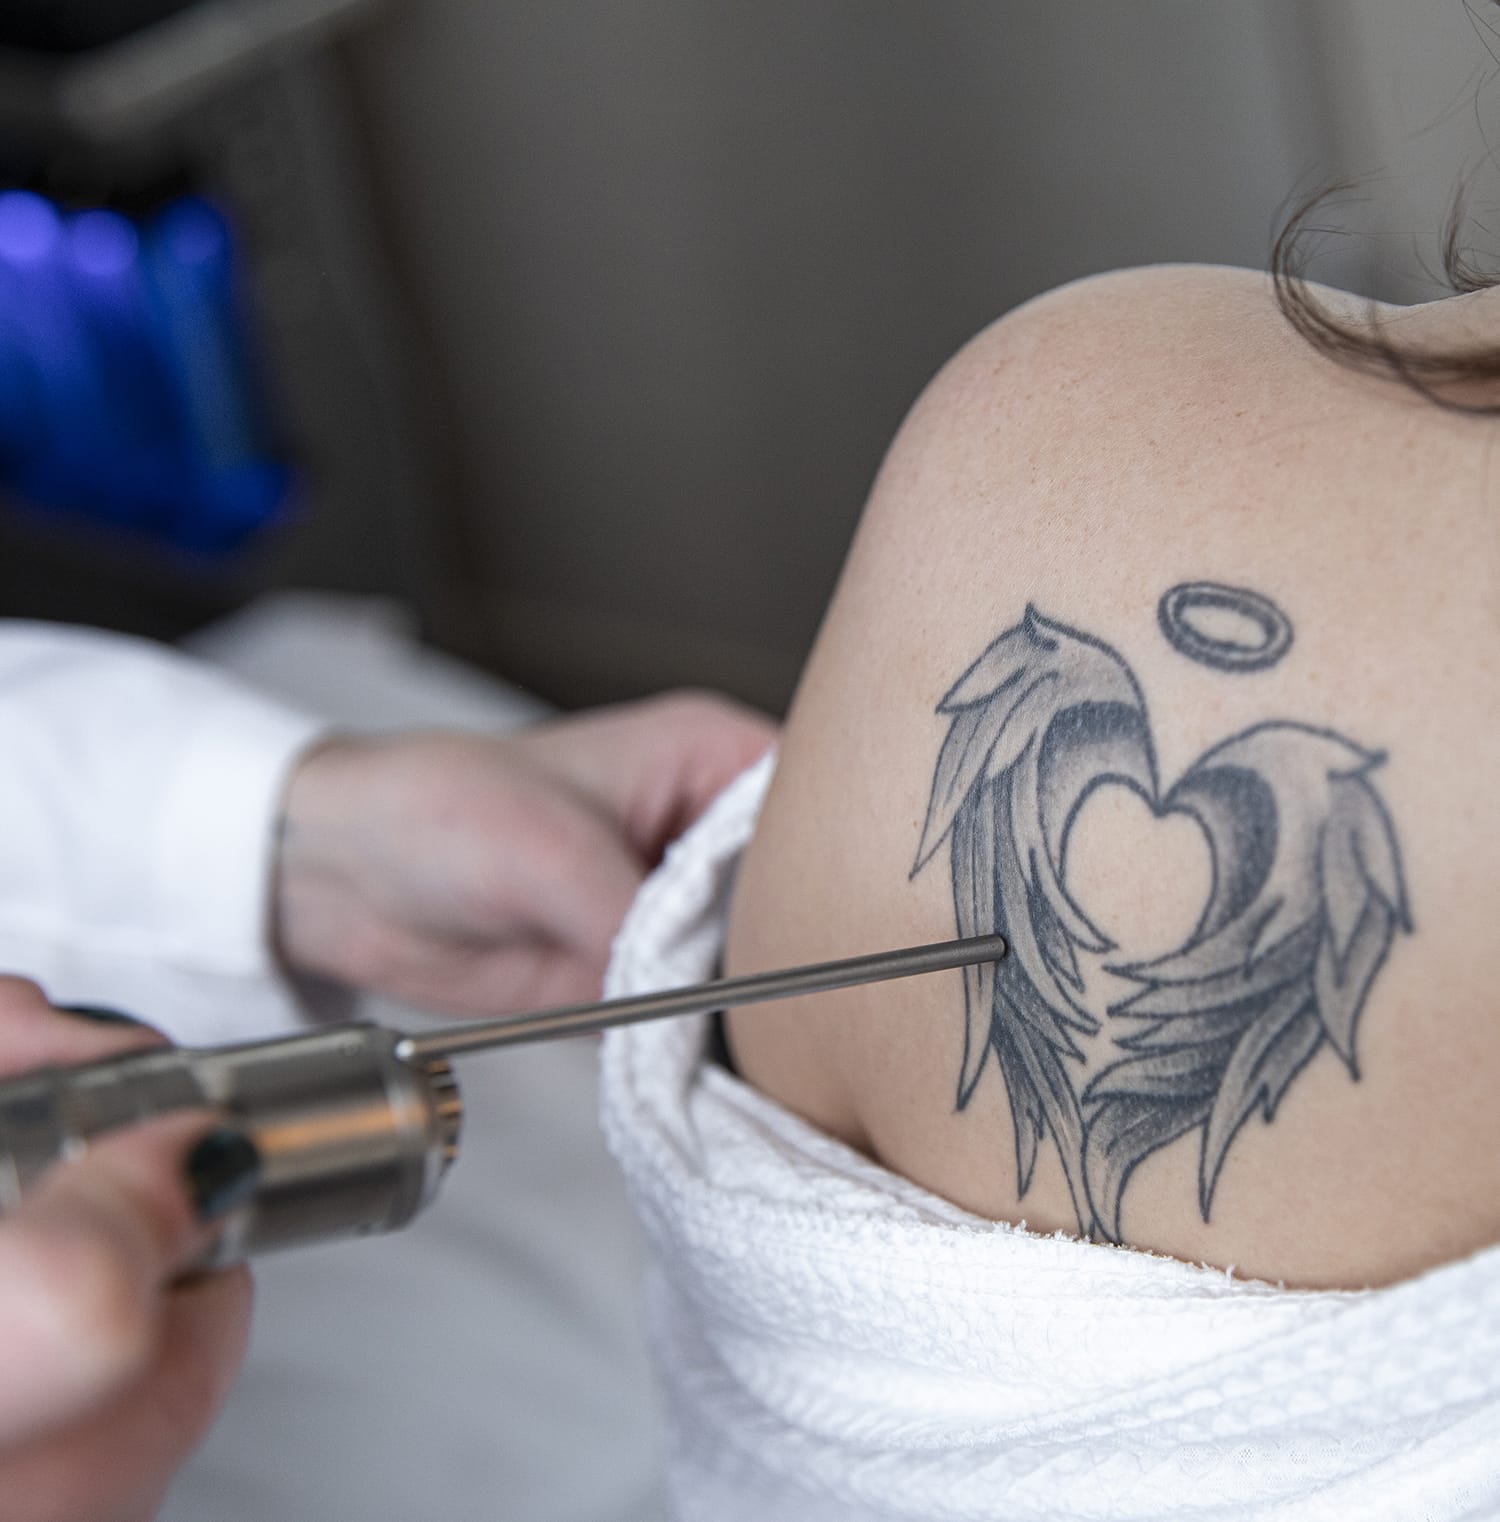 Tattoo Removals: Facts, Cost, Risks, and More